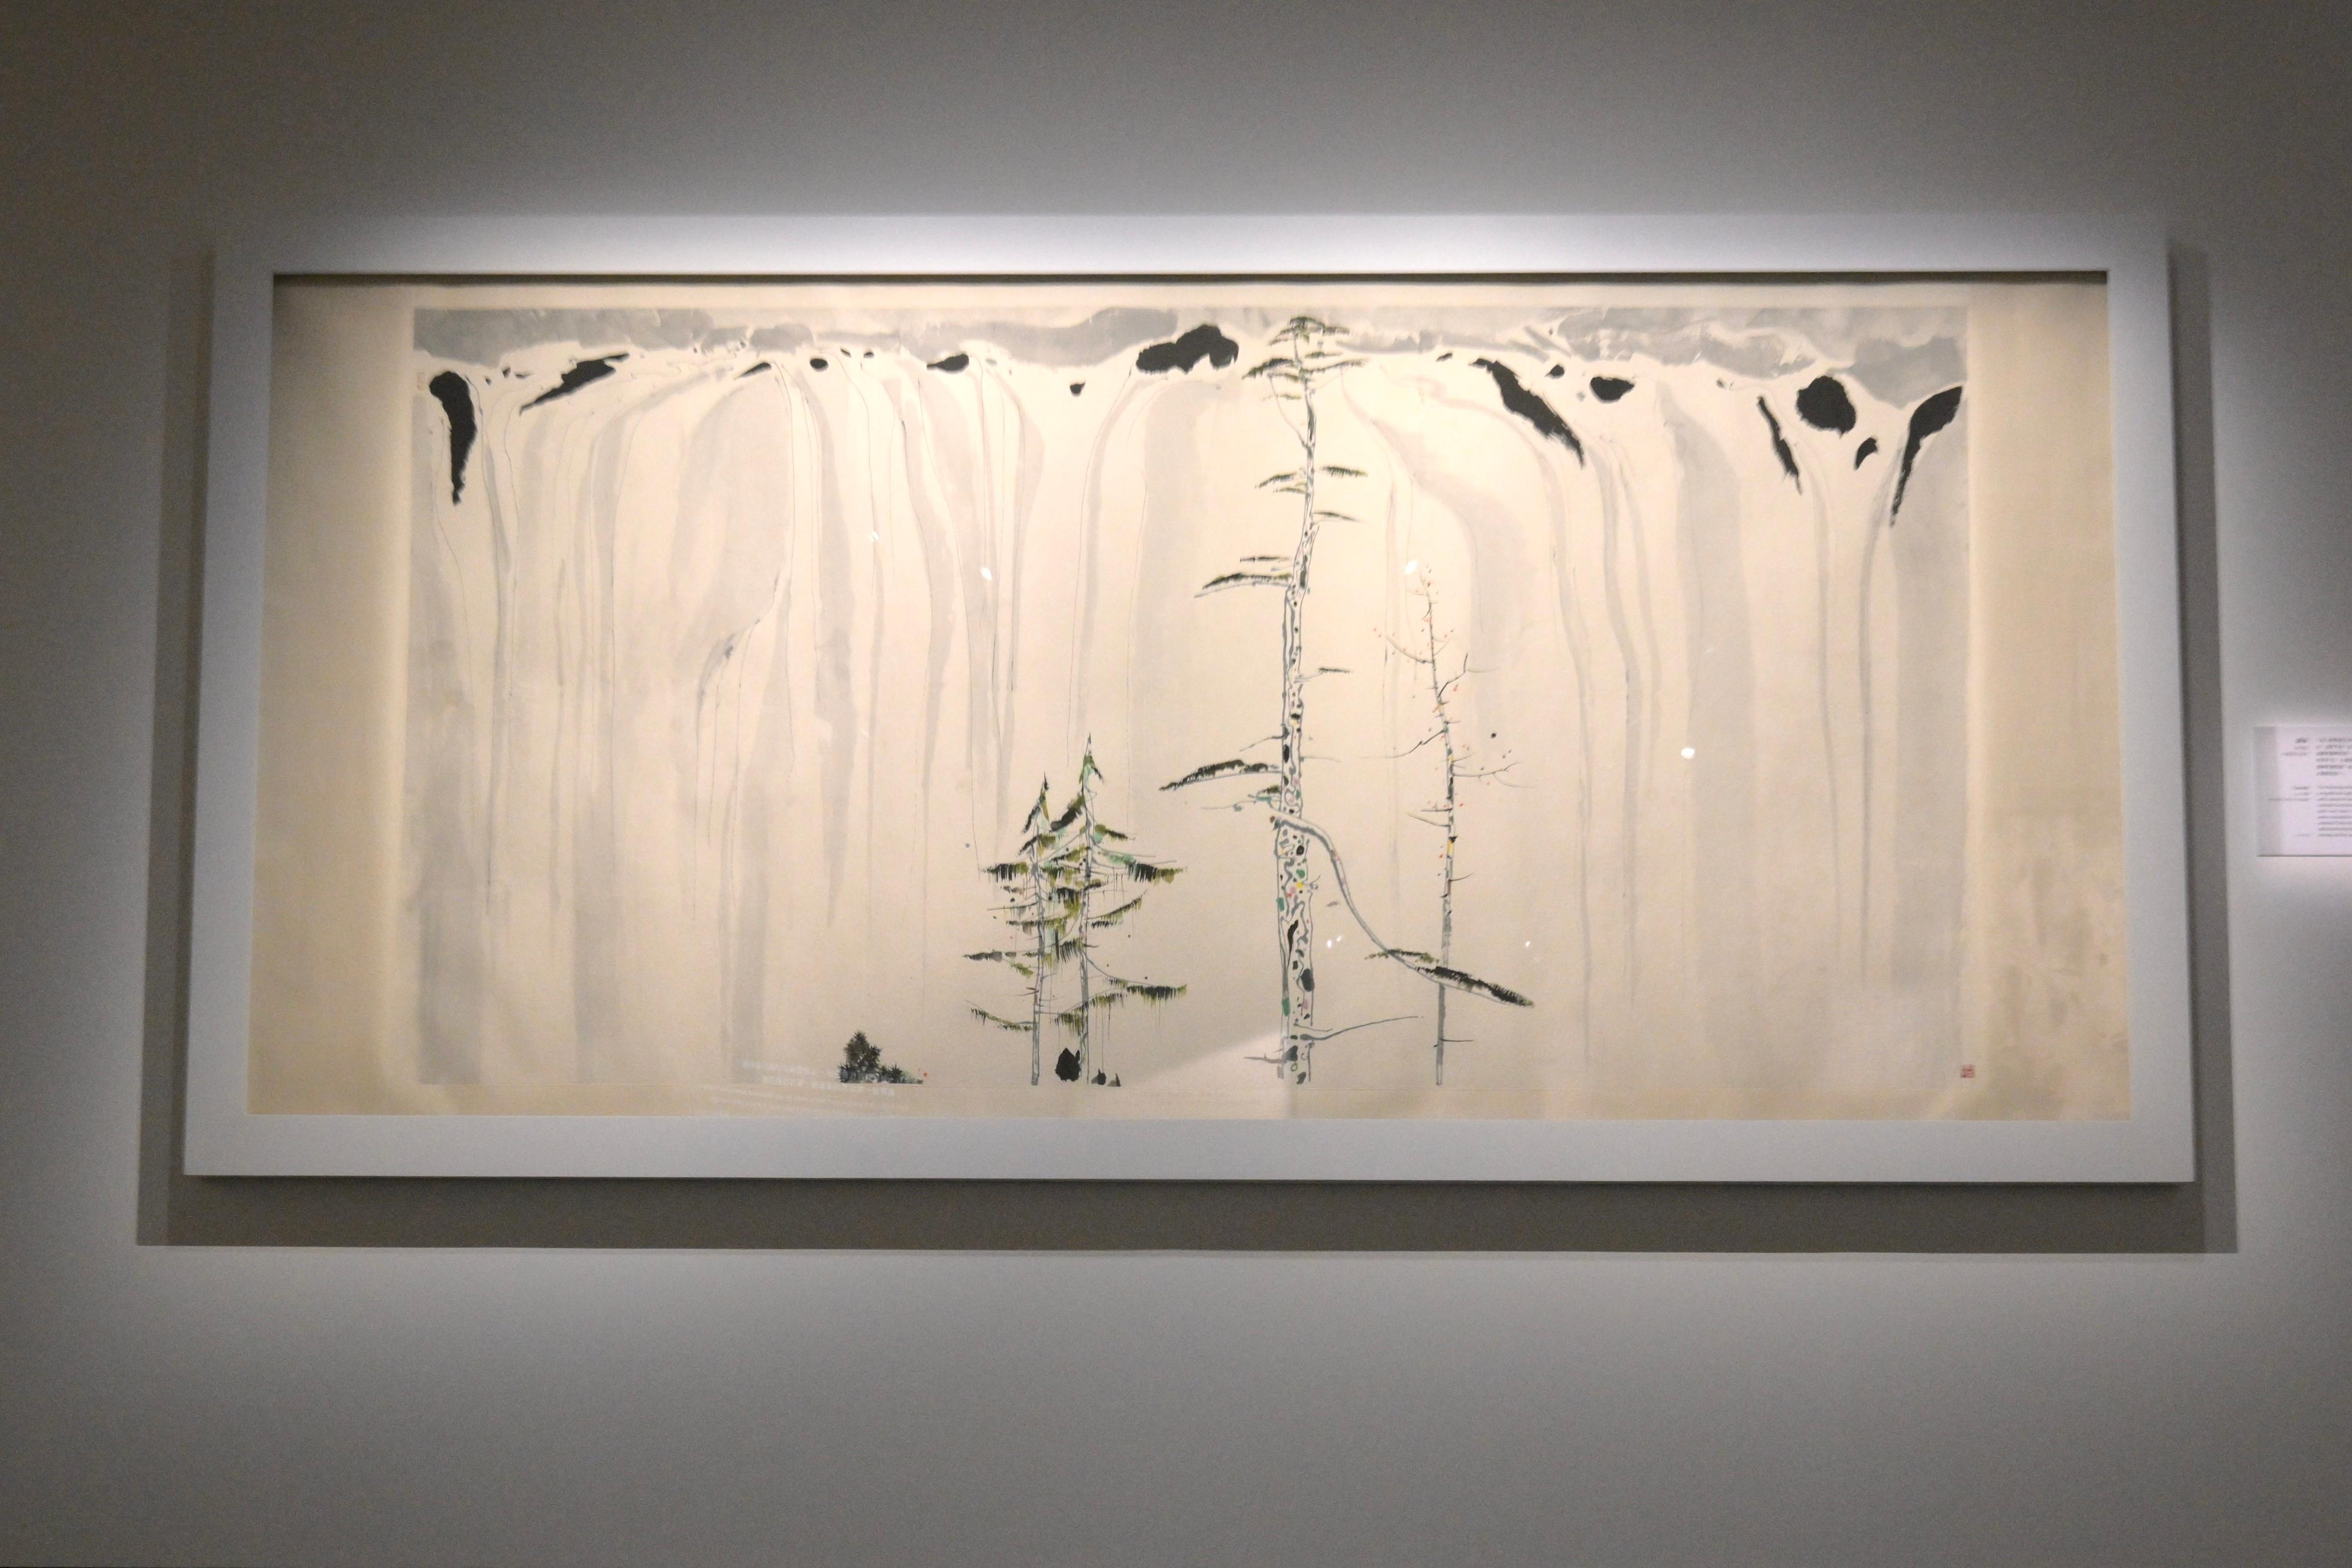 The Wu Guanzhong Art Sponsorship: Thematic Exhibition Series opened today (March 21) at the Hong Kong Museum of Art (HKMoA). Picture shows Wu's work "Cascade", which is on display at the "Wu Guanzhong: Between Black and White" exhibition. It was the first artwork Wu donated to the HKMoA in 1995.